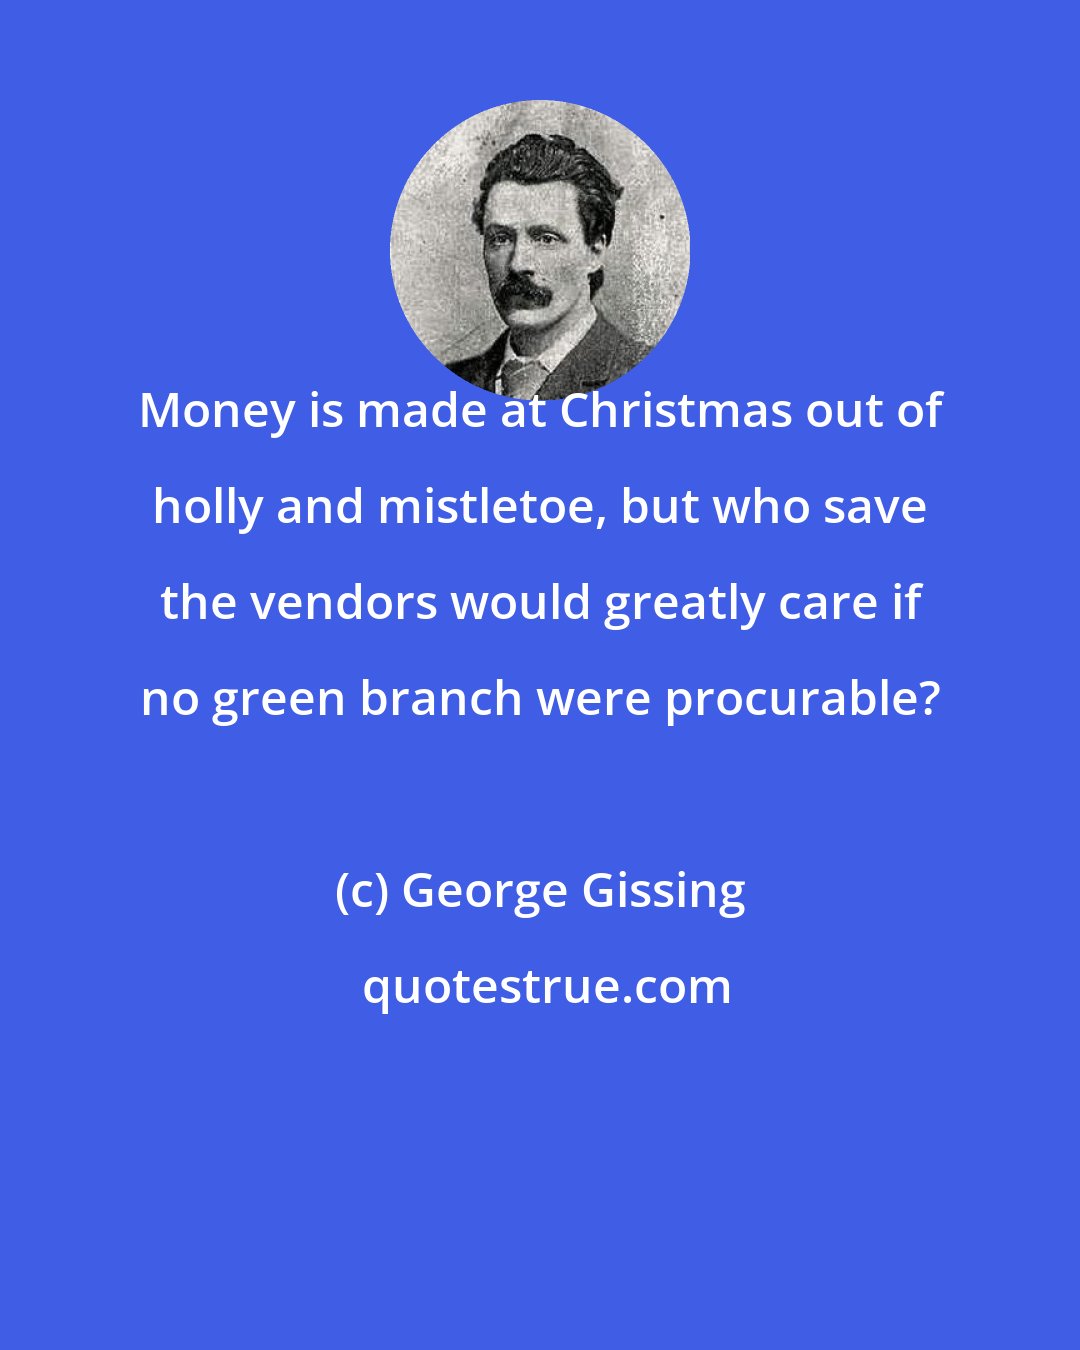 George Gissing: Money is made at Christmas out of holly and mistletoe, but who save the vendors would greatly care if no green branch were procurable?